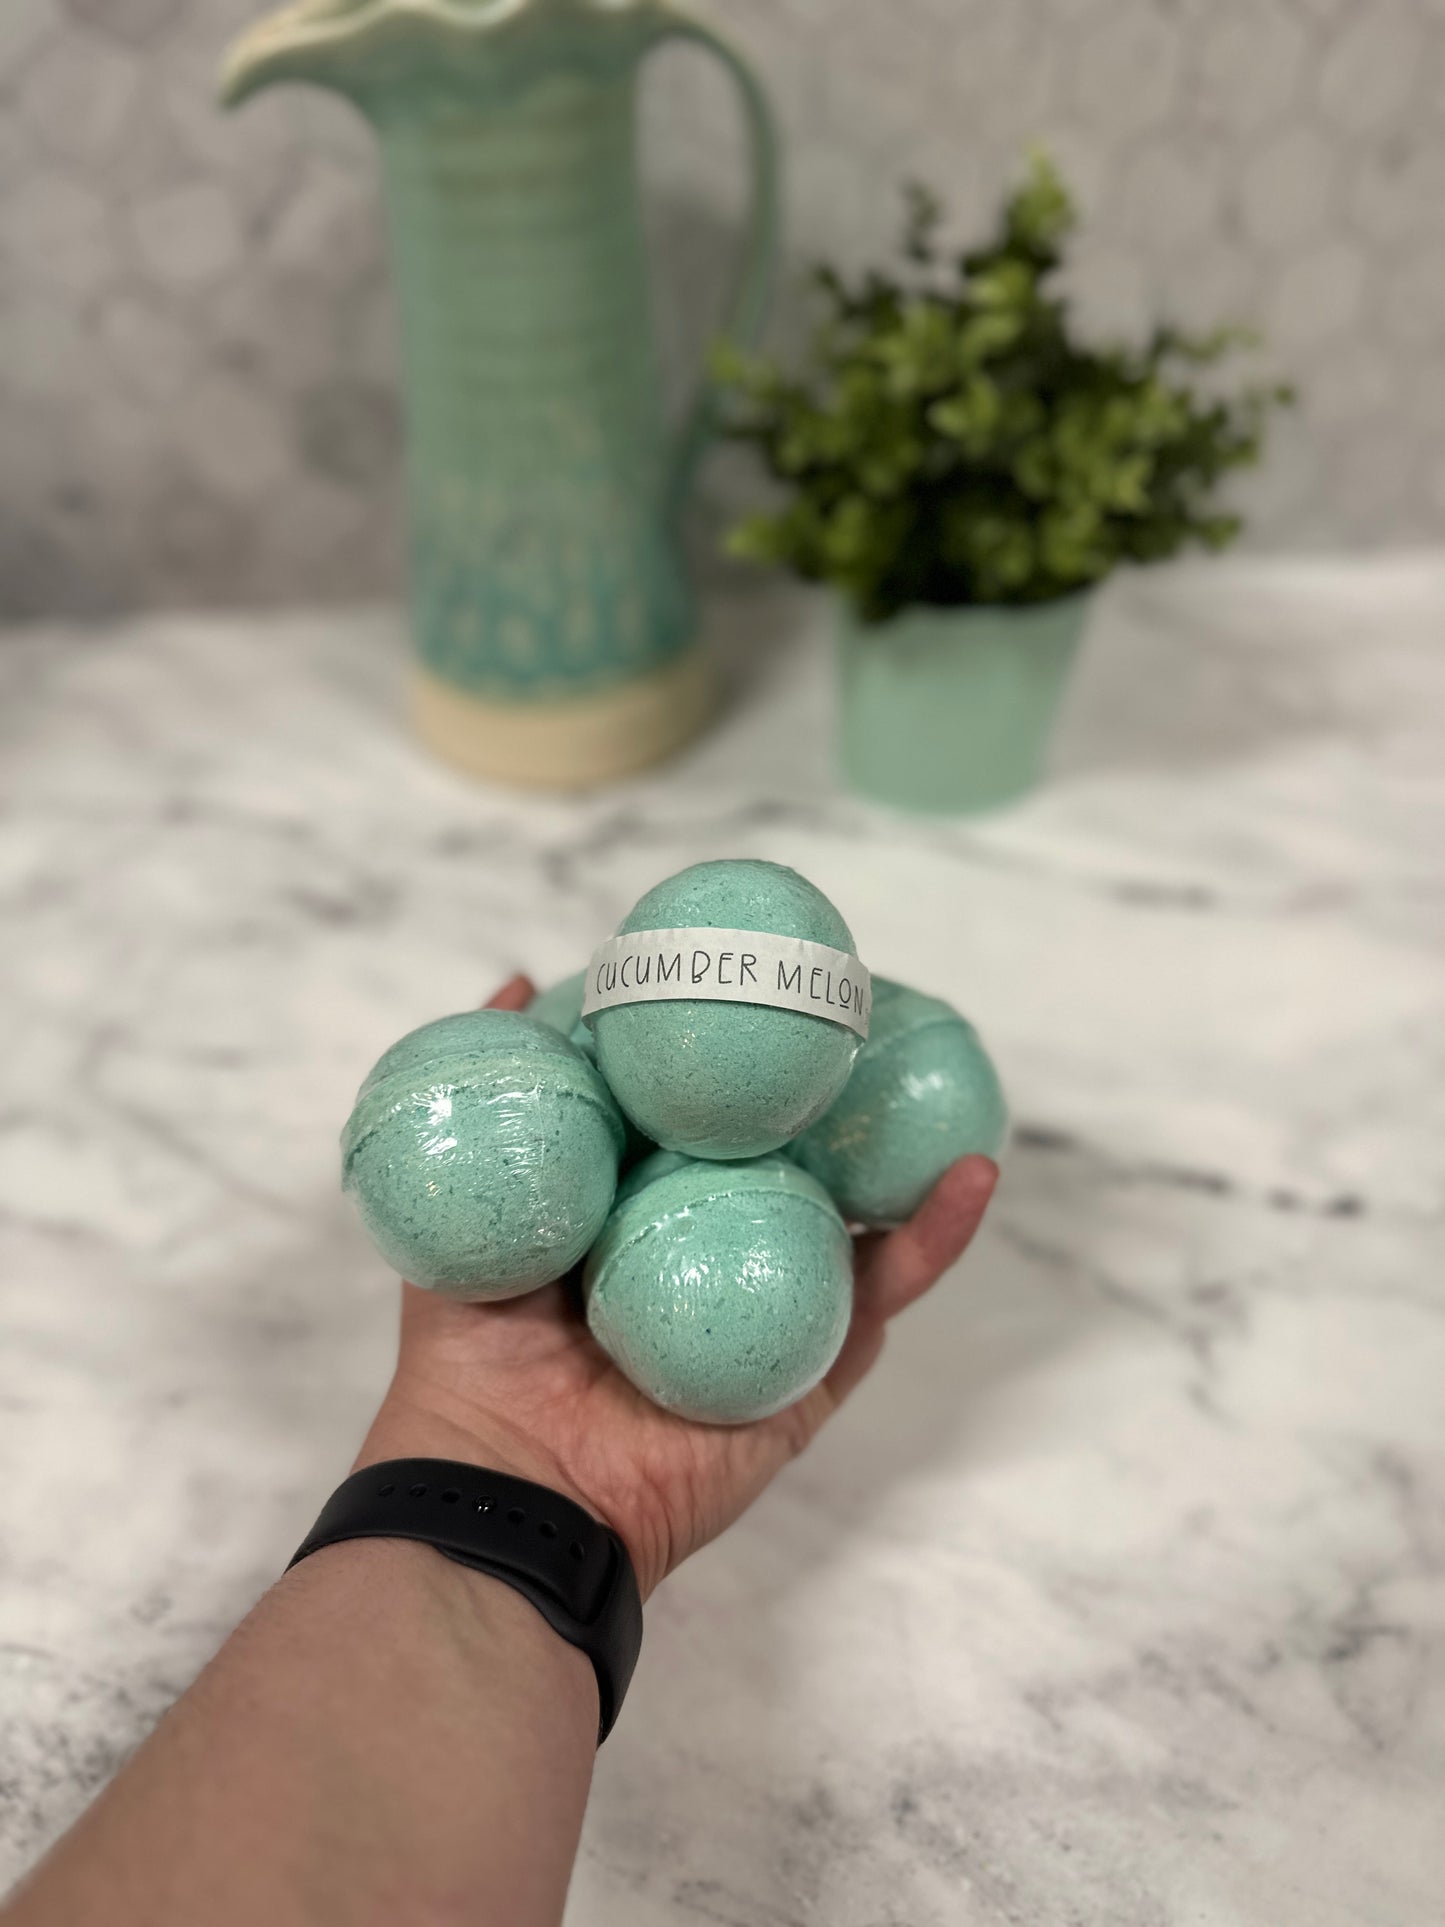 Soothing Bath Bombs - Cucumber Melon